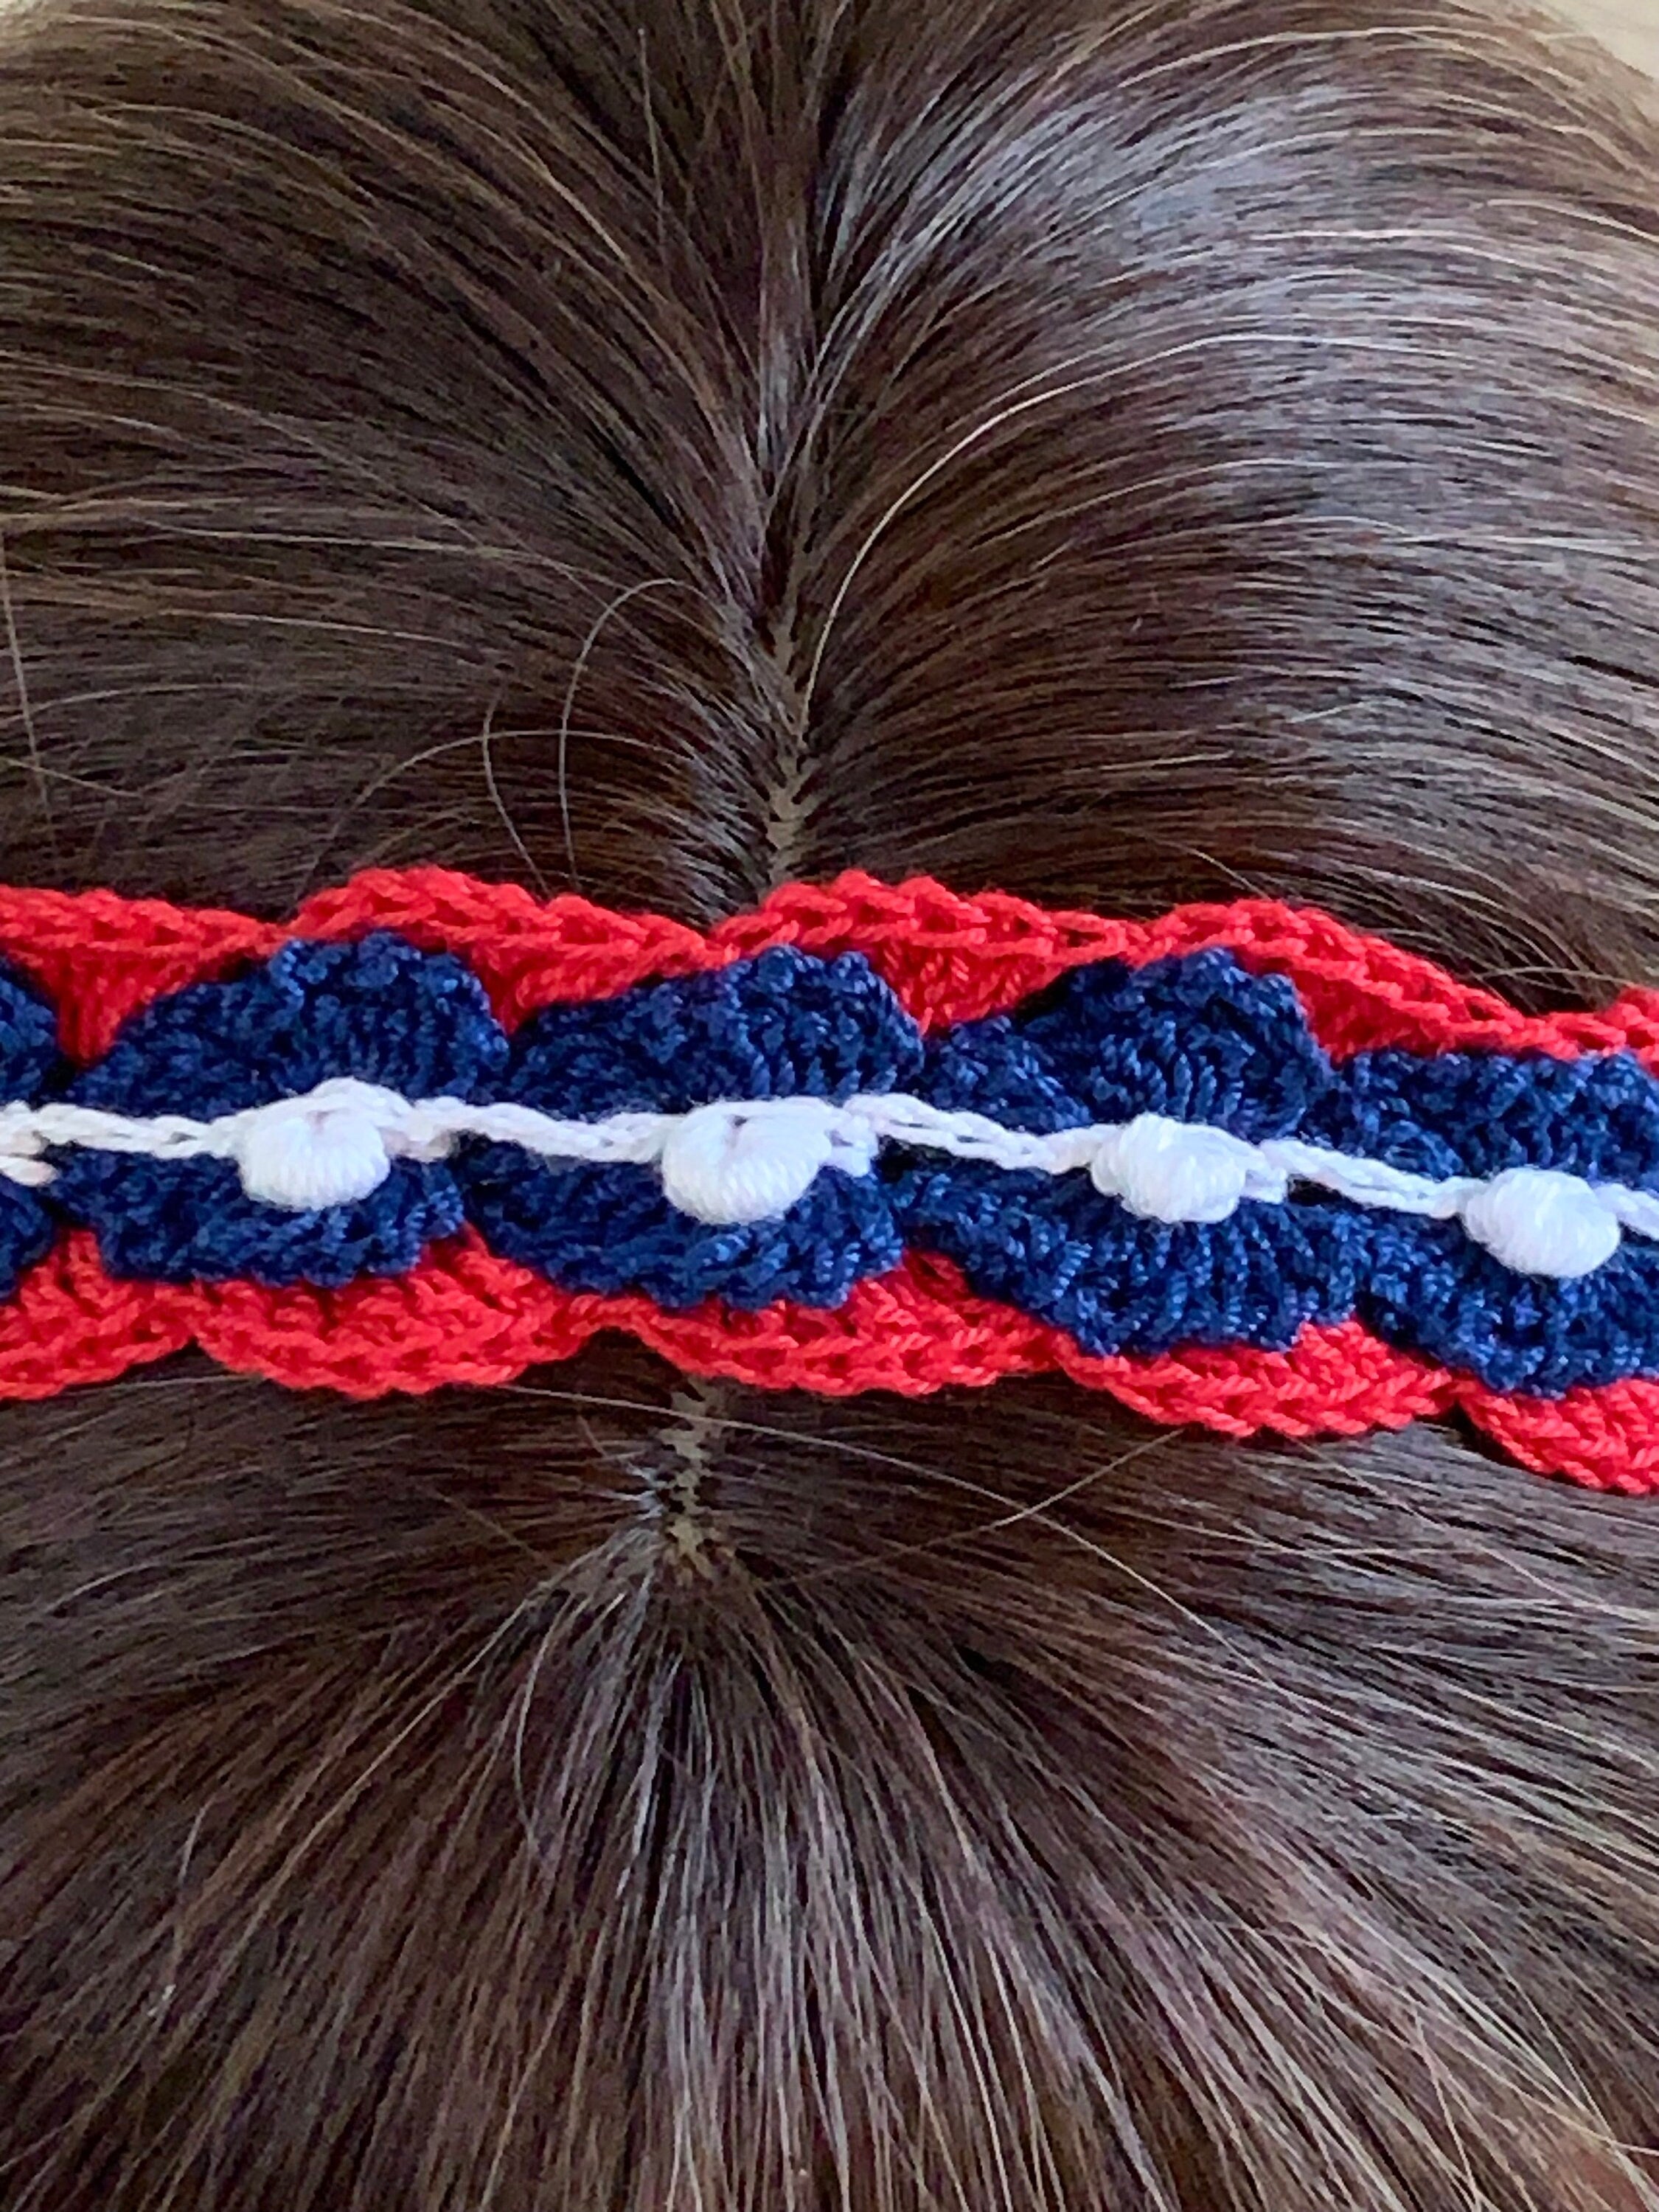 Crochet Red White and Blue Patriotic Headband with Elastic with optional Dangle Earrings